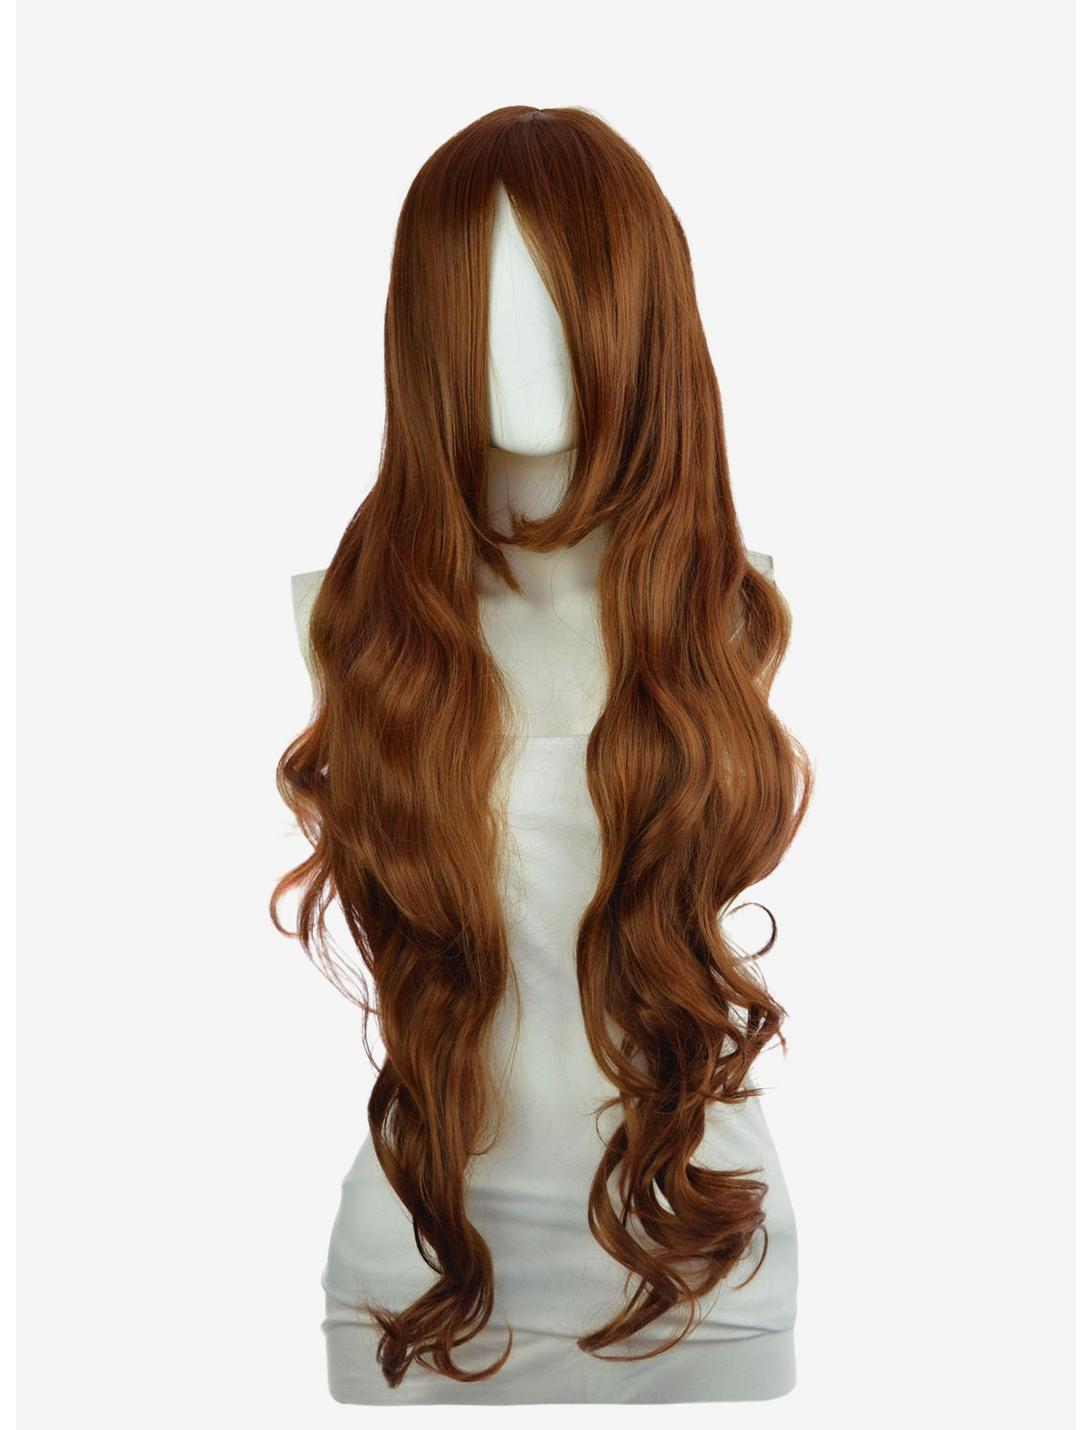 Epic Cosplay Hera Light Brown Long Curly Wig, , hi-res